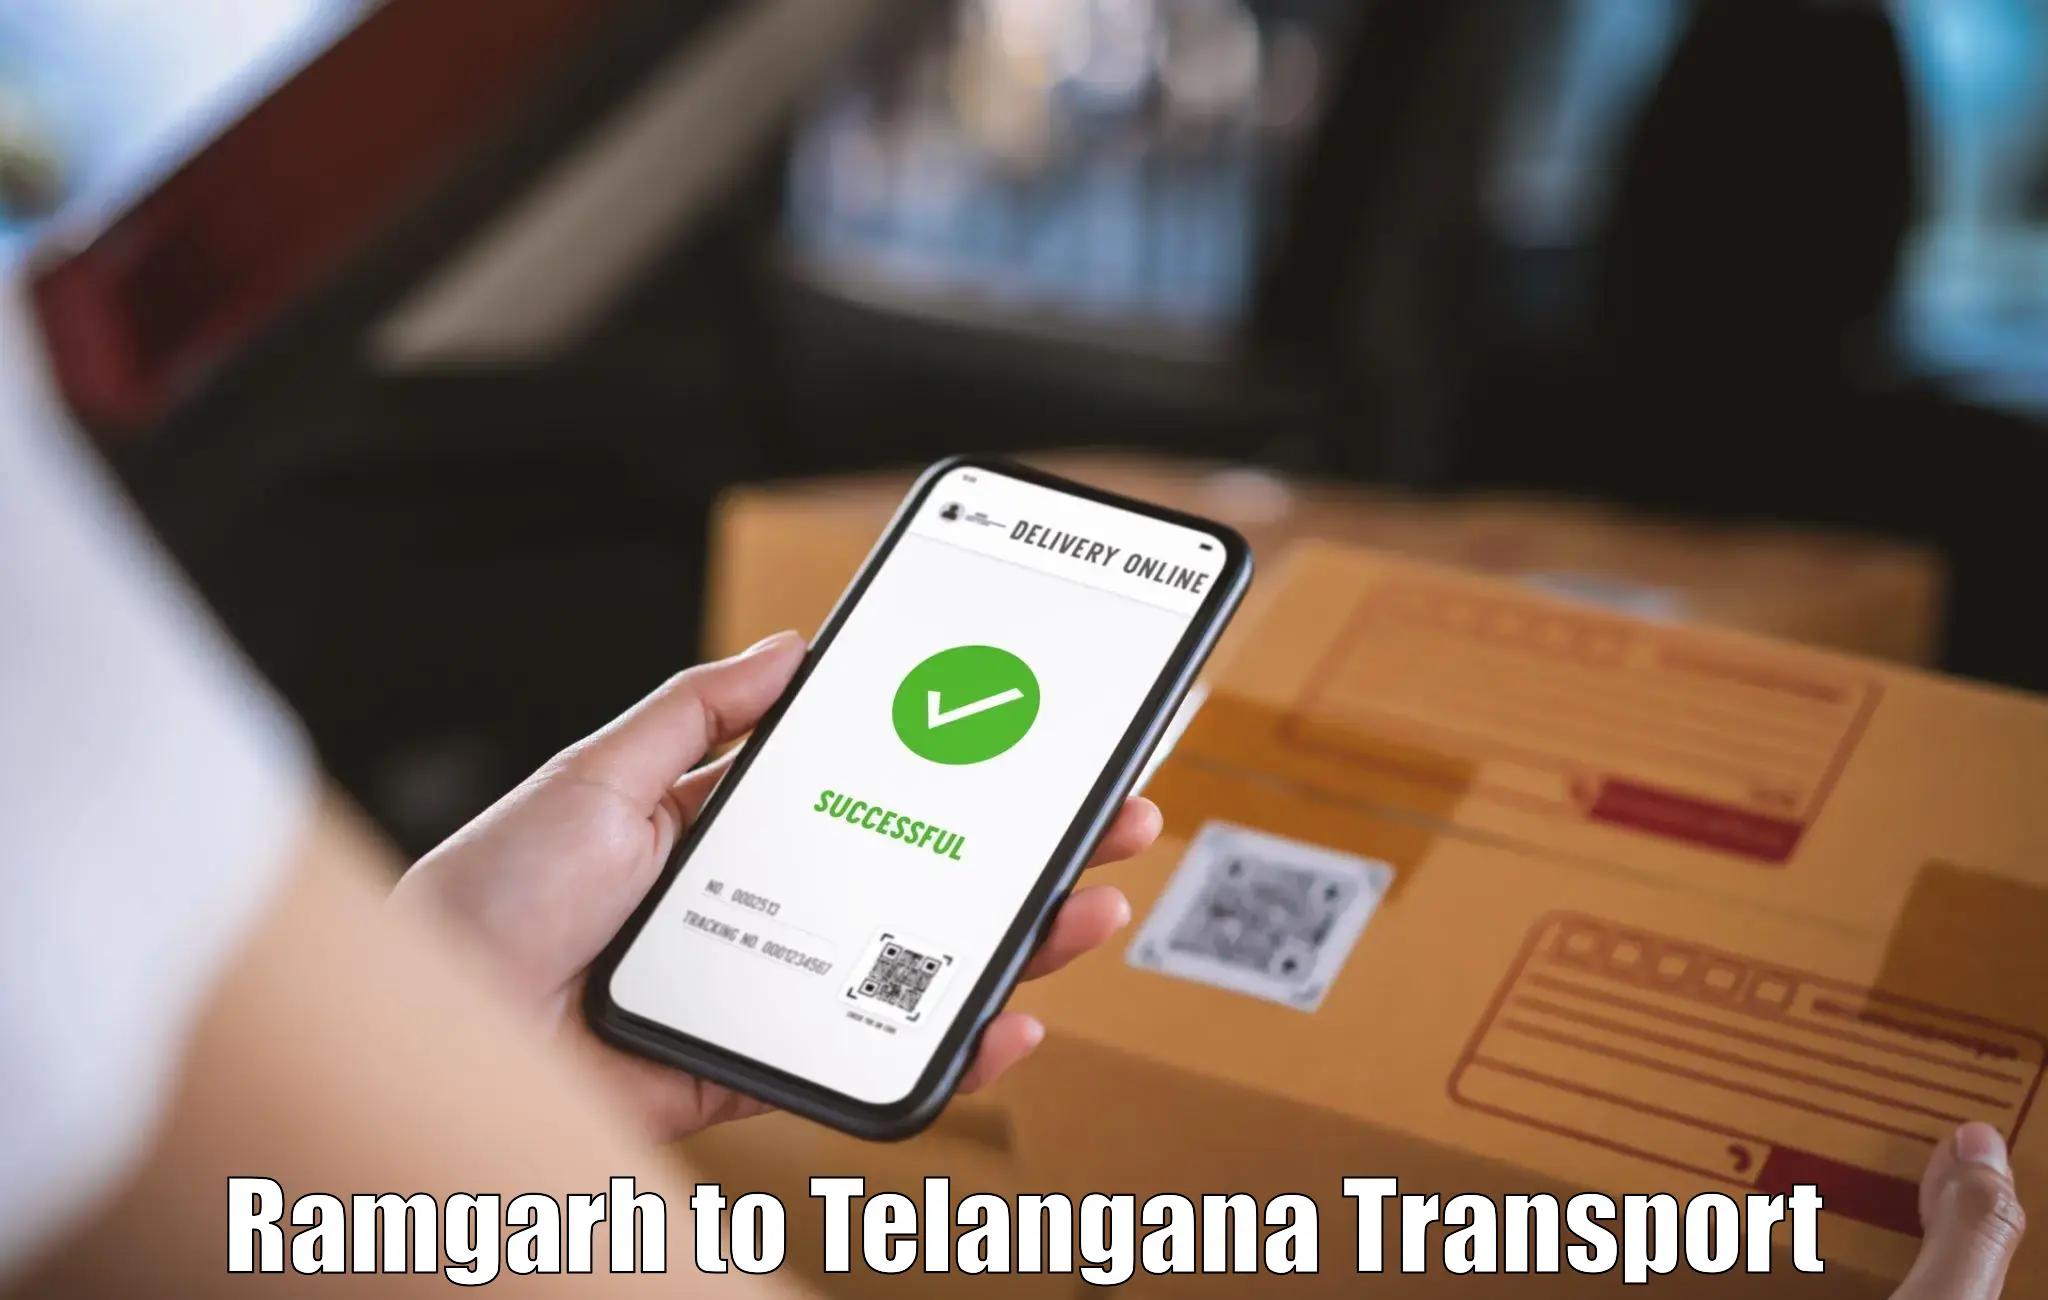 Goods delivery service Ramgarh to Vemulawada